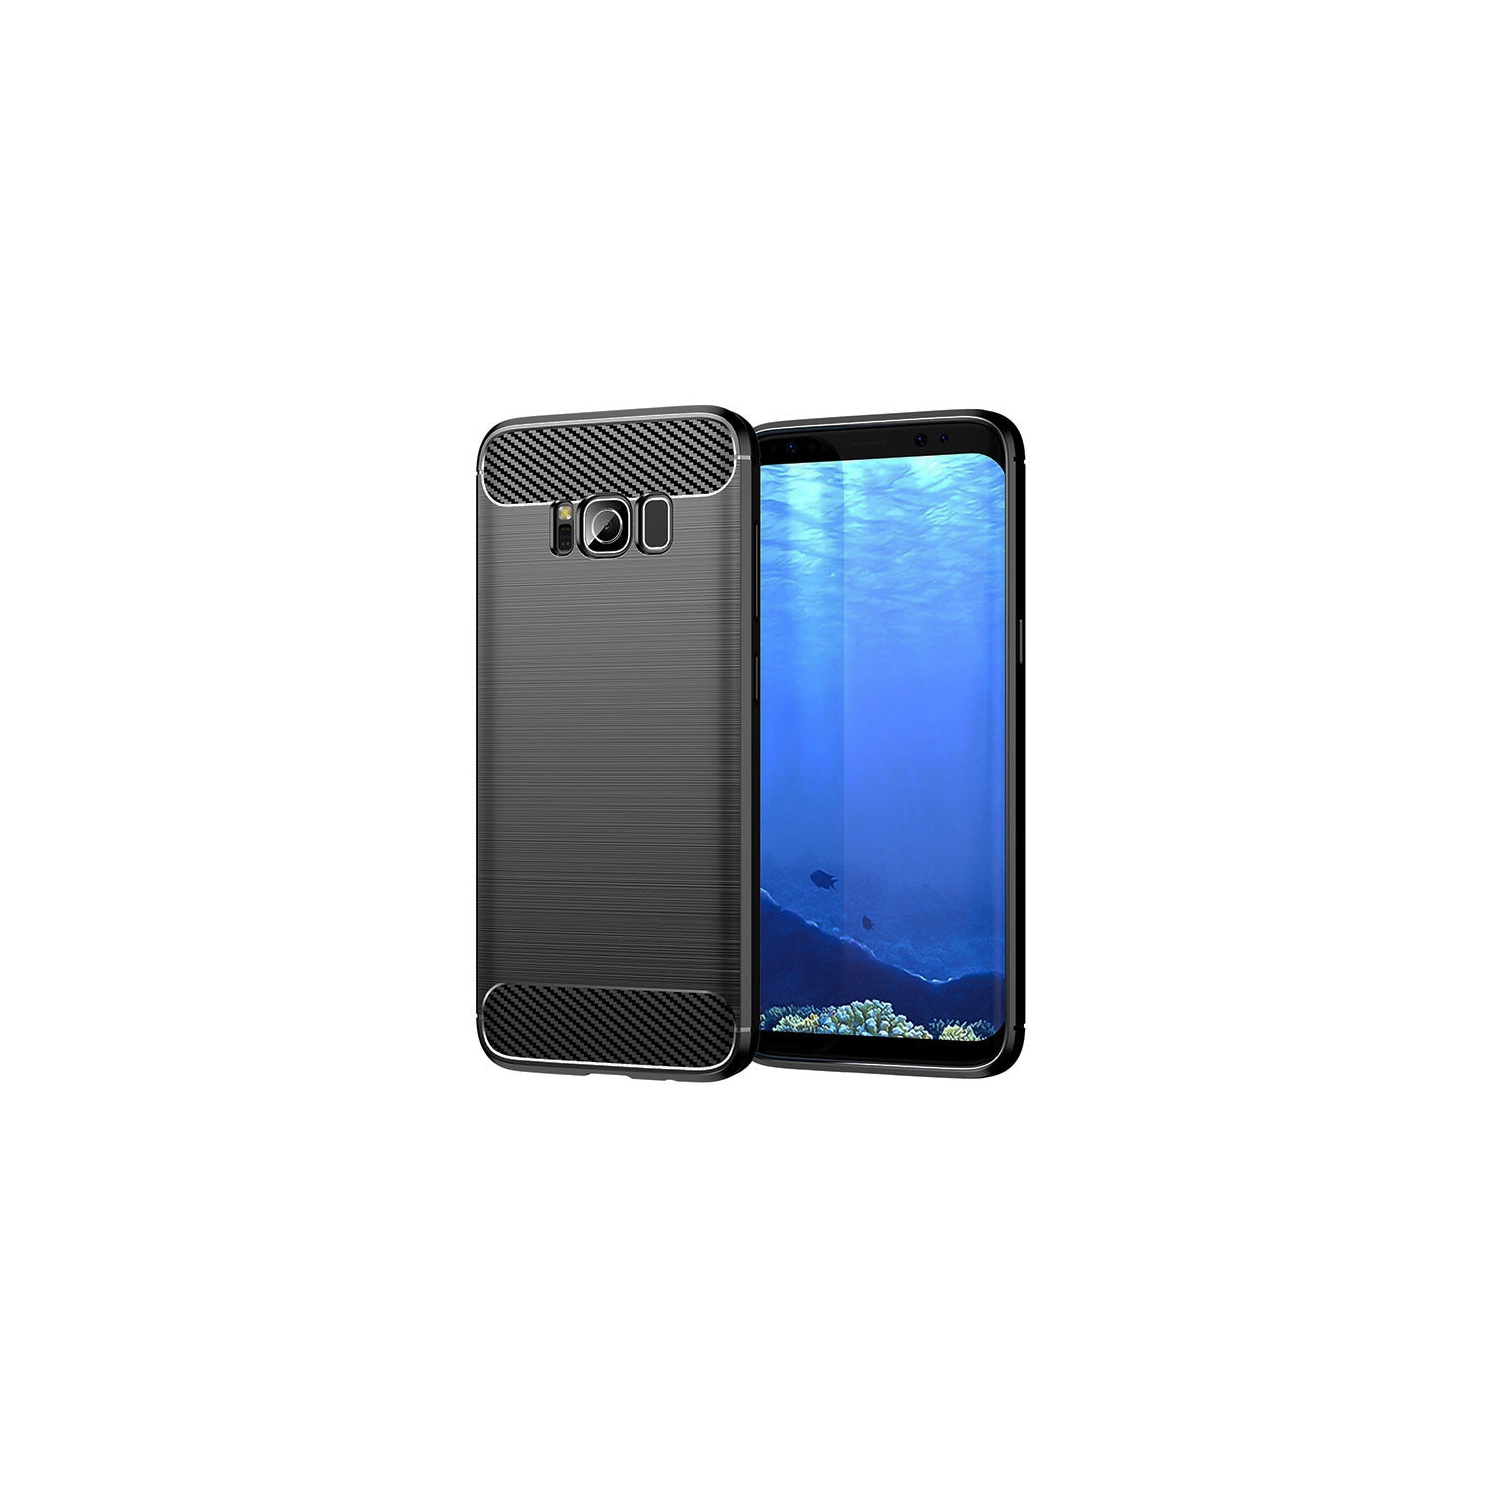 PANDACO Black Brushed Metal Case for Samsung Galaxy S8